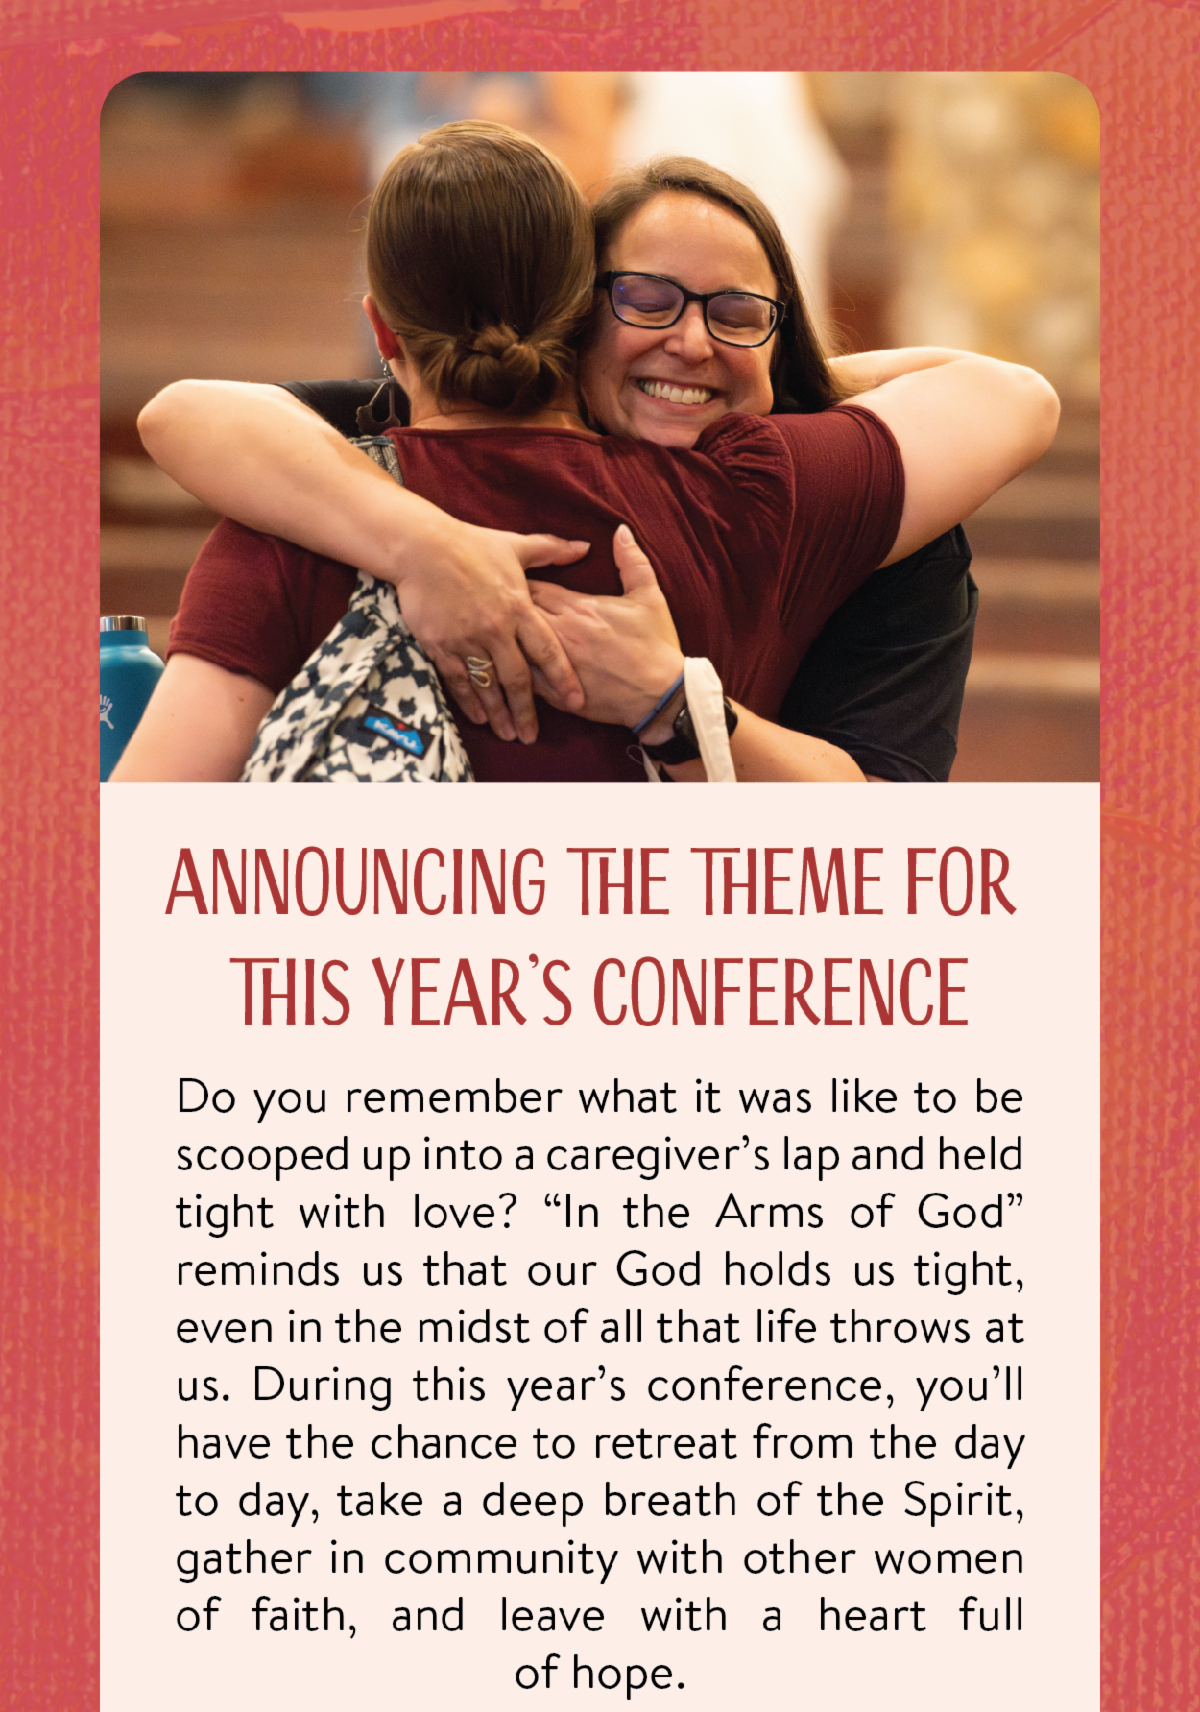 Announcing the theme for this year's conference - Do you remember what it was like to be scooped up into a caregiver’s lap and held tight with love? “In the Arms of God” reminds us that our God holds us tight, even in the midst of all that life throws at us. During this year’s conference, you’ll have the chance to retreat from the day to day, take a deep breath of the Spirit, gather in community with other women of faith, and leave with a heart full of hope.